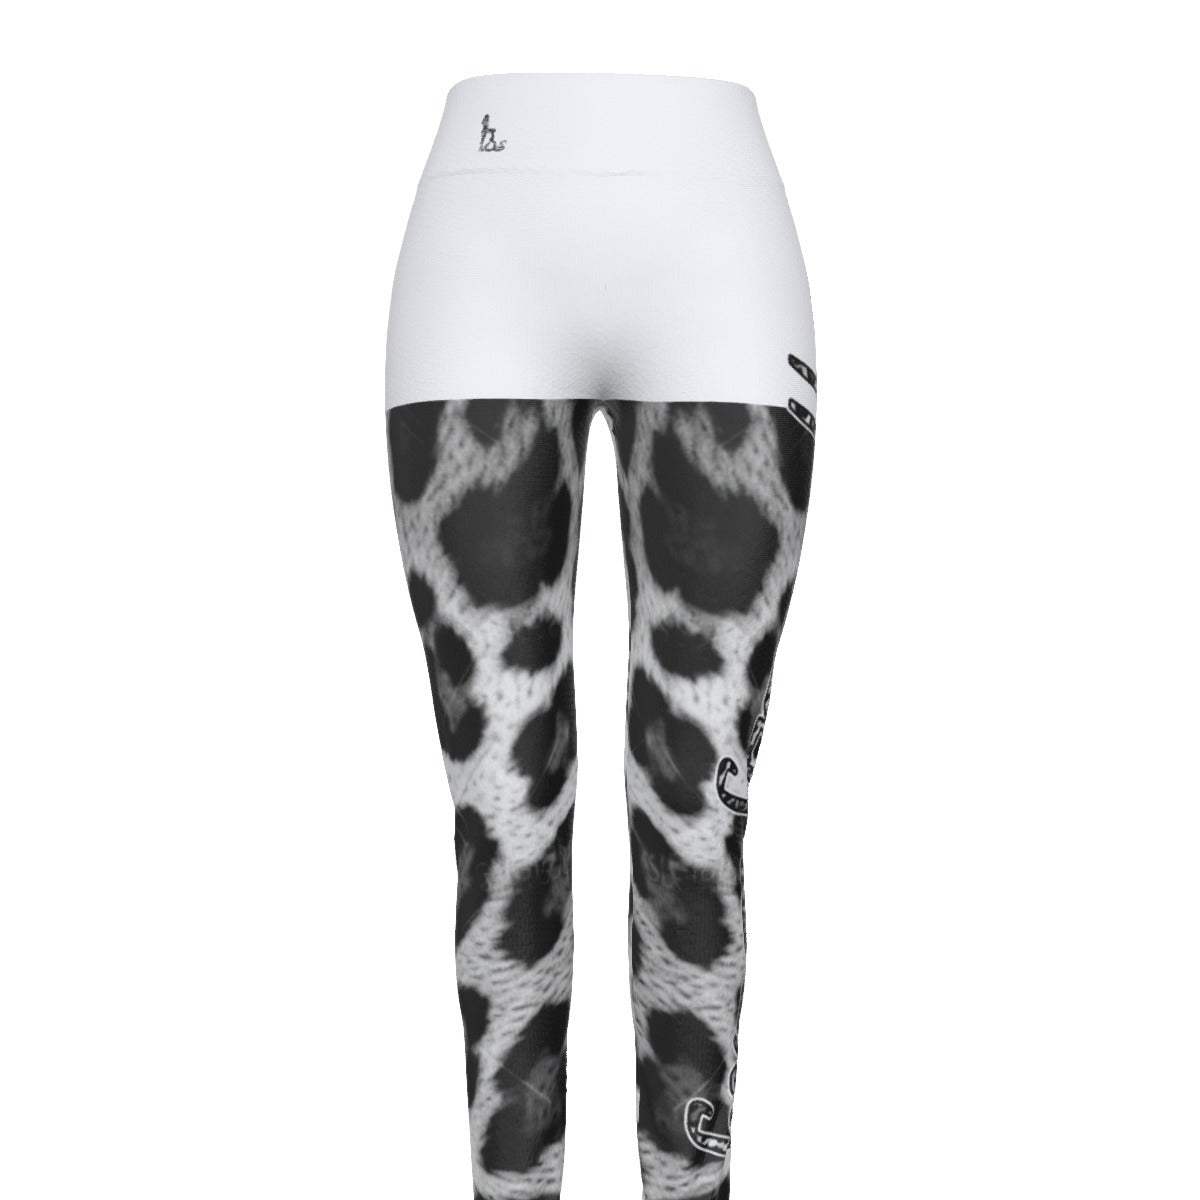 Officially Sexy Snow Leopard Print Collection Women's White High Waist Booty Popper Leggings #2 (English) 1 